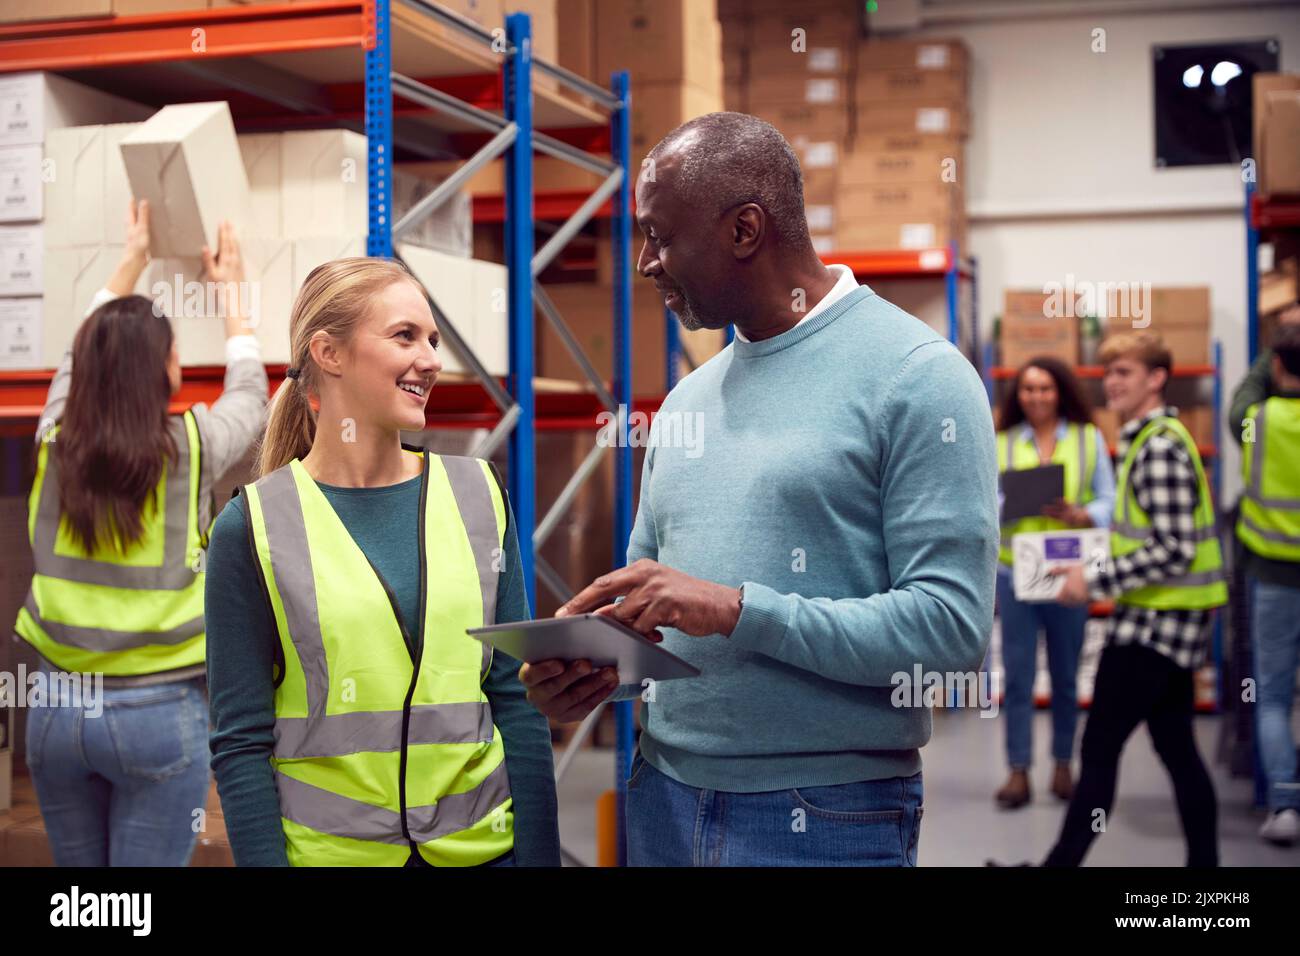 Female Intern With Team Leader Looking At Digital Tablet Inside Busy Warehouse Facility Stock Photo